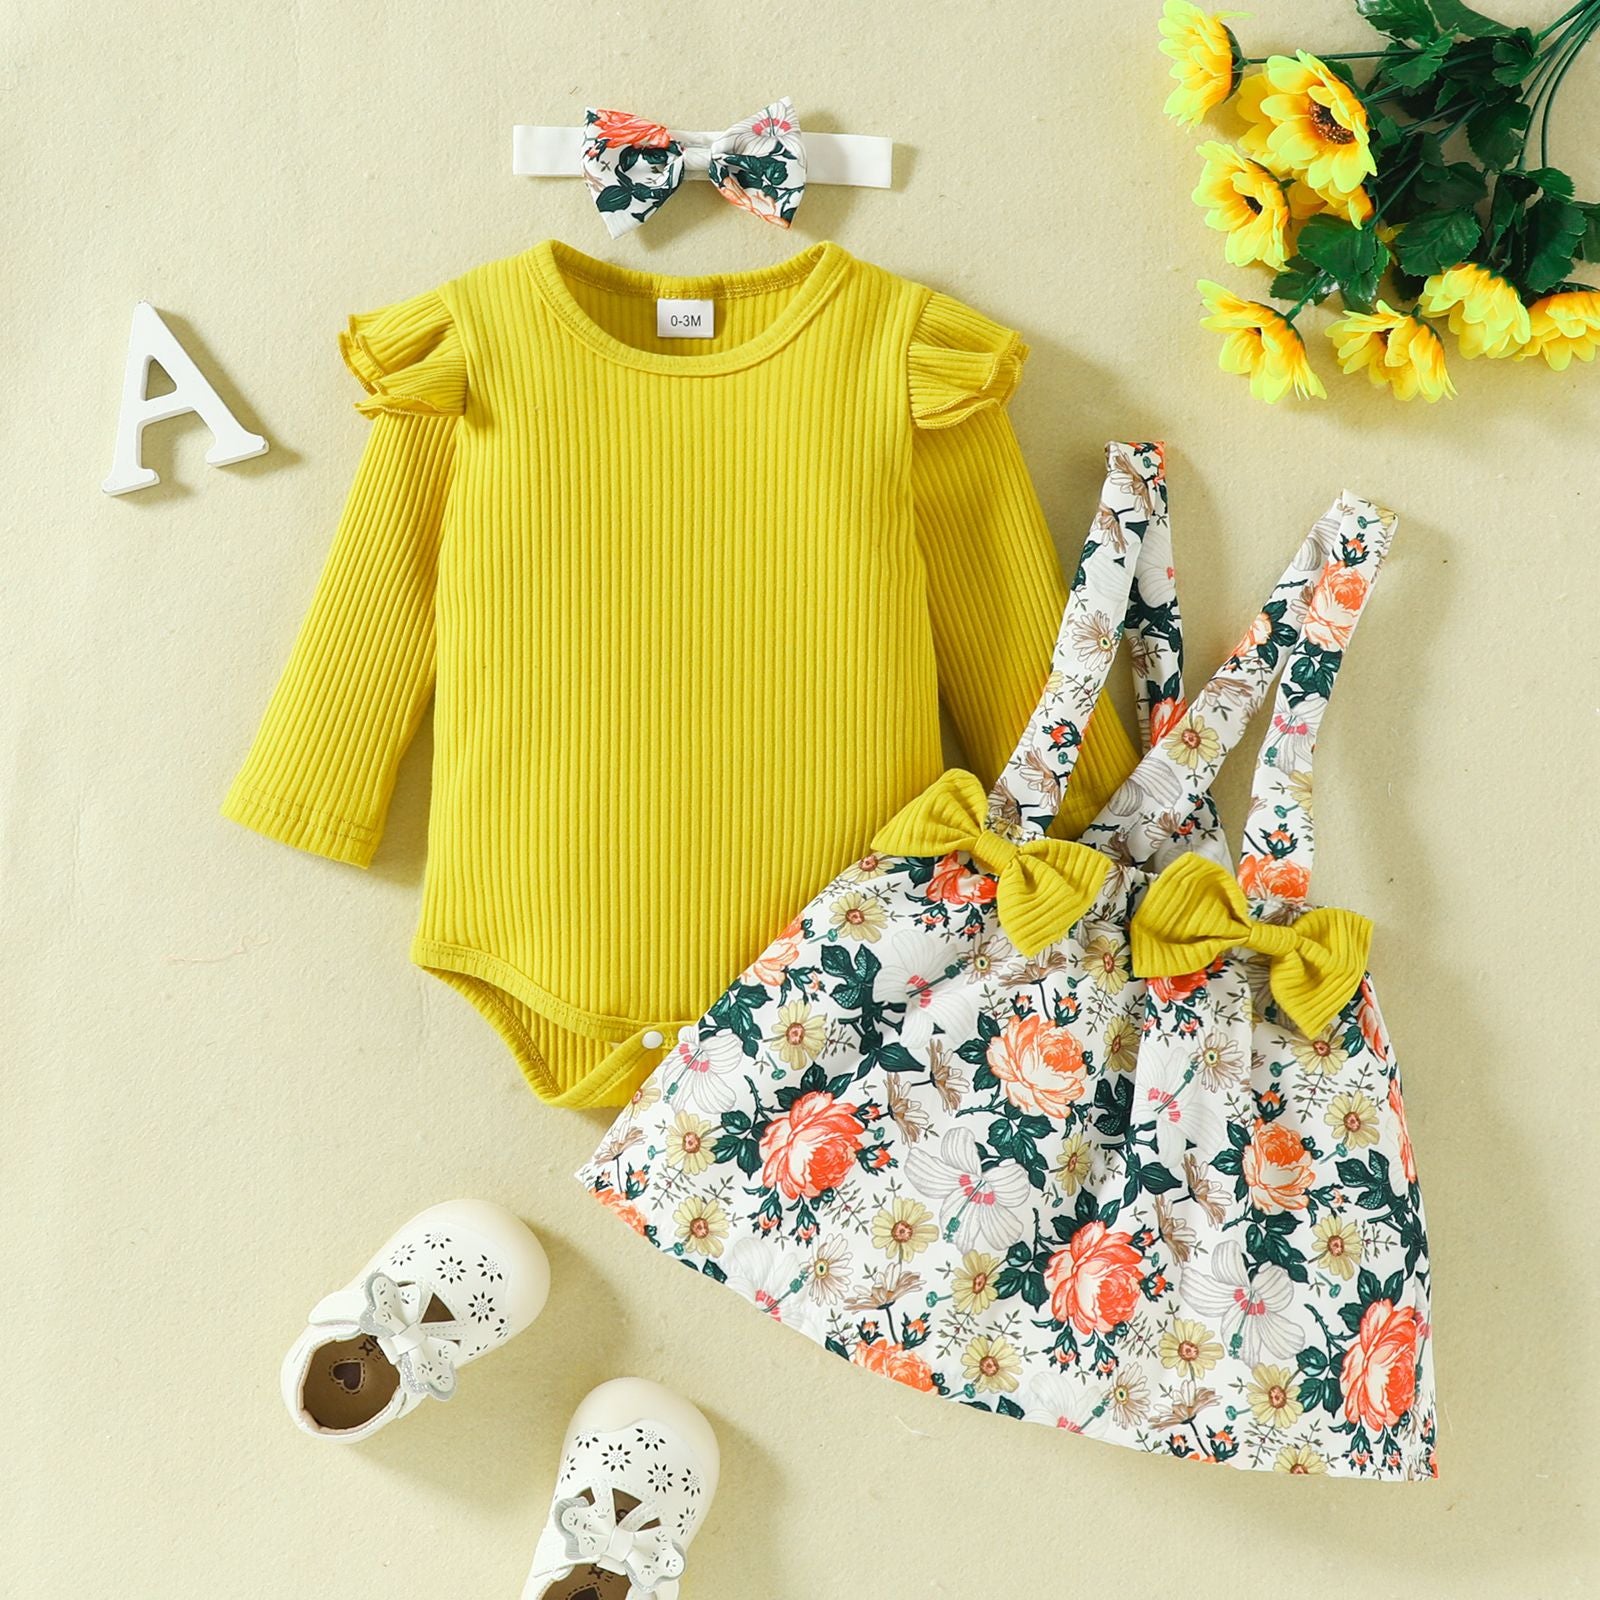 Cute Baby Girl Outfits Sets Cartoon Fox Dress Heart Romper+Suspender Bowknot Dress Party Newborn Clothing For Girls